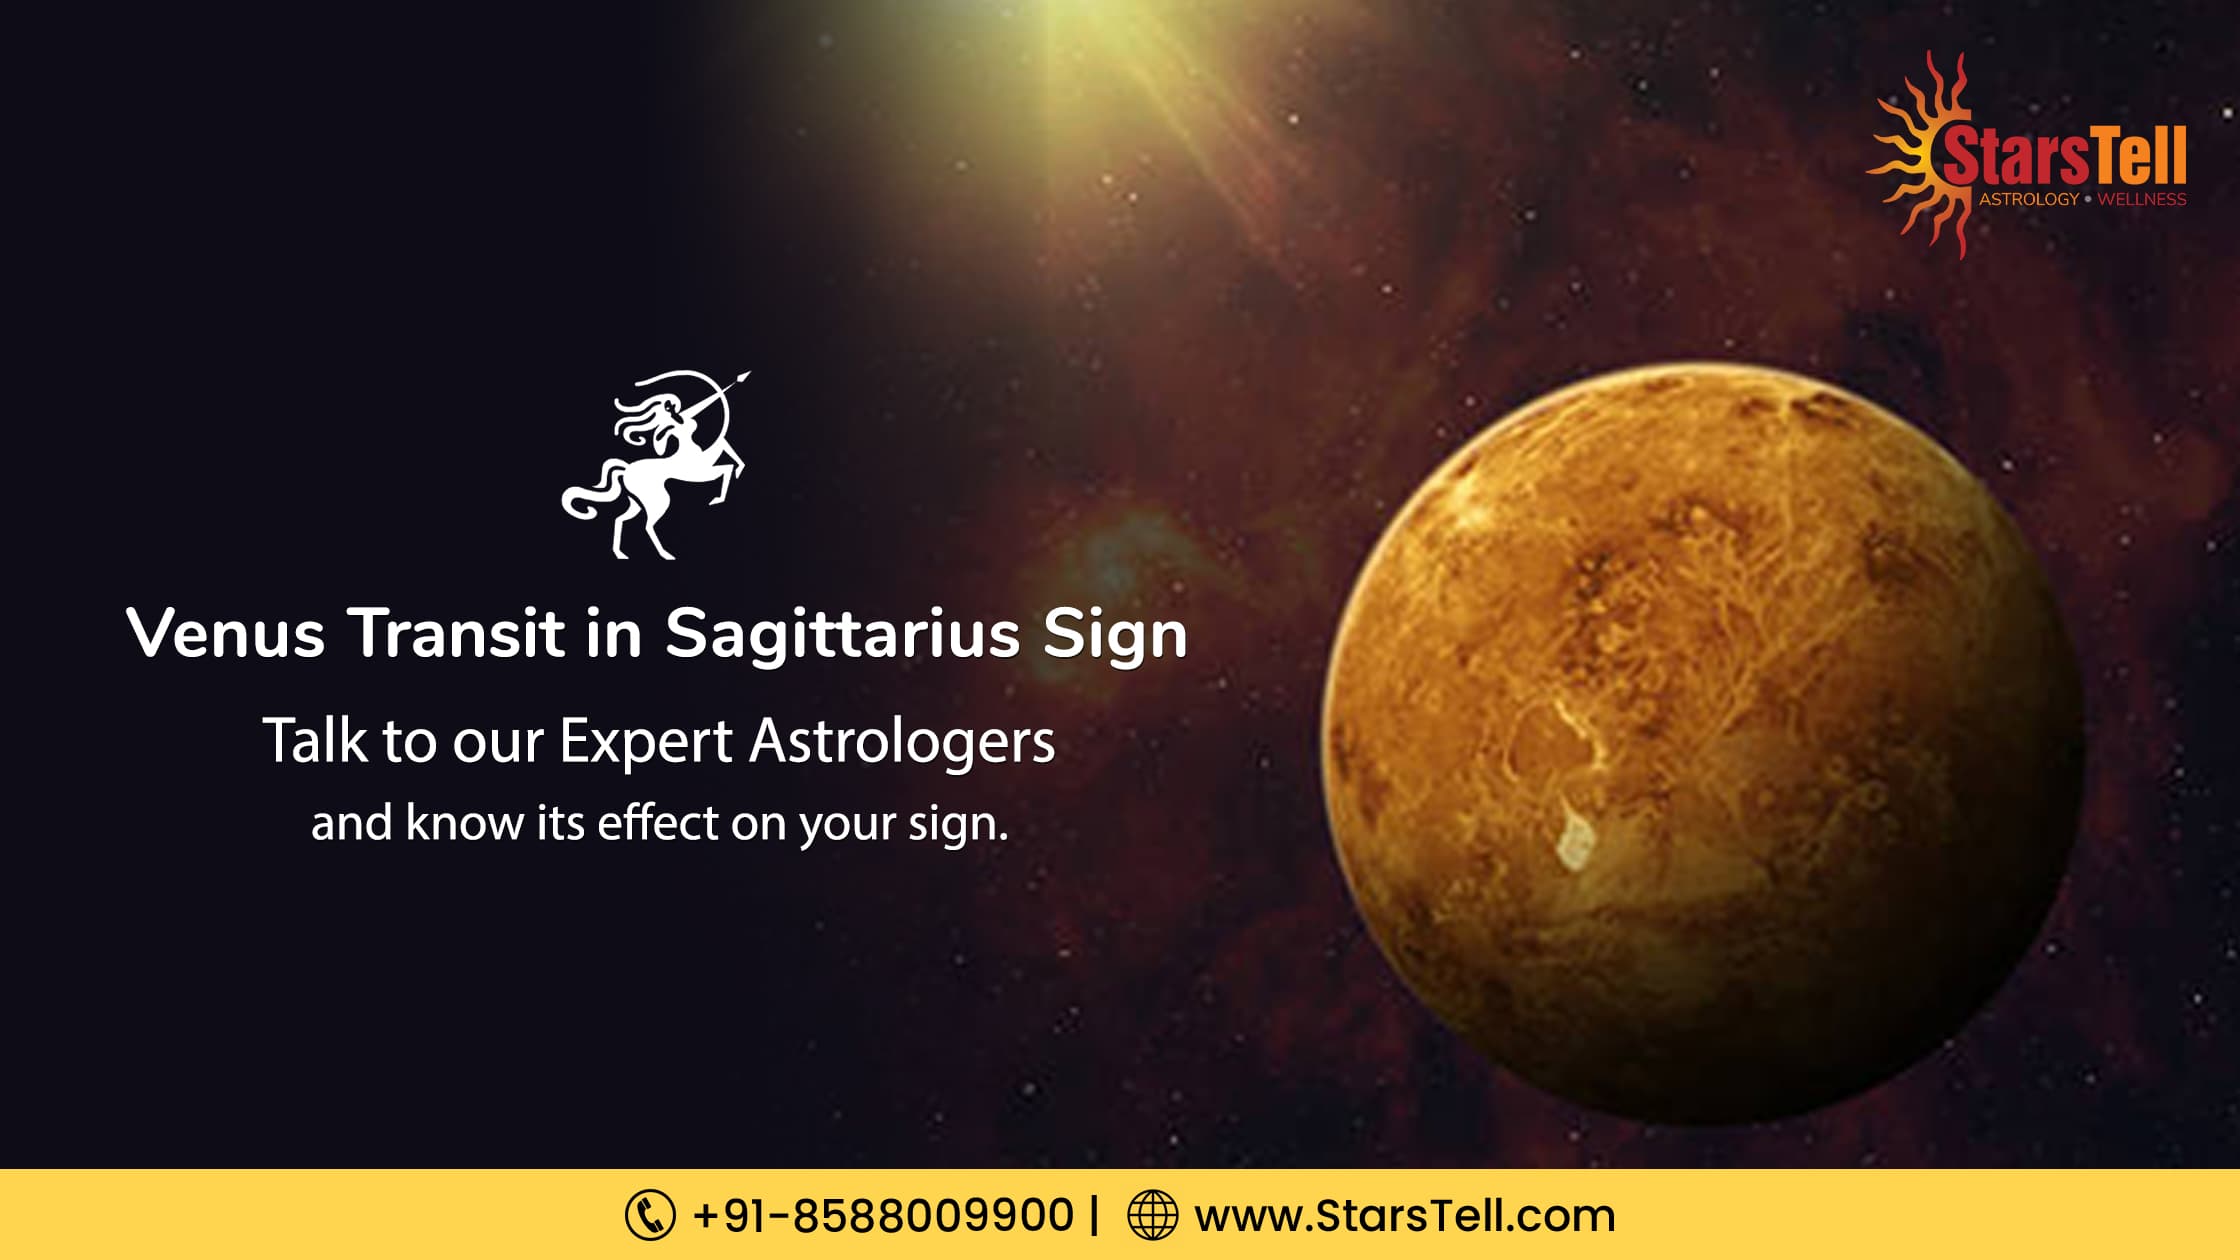 Venus Transit in Sagittarius Sign 2022: Know Effects and Remedies as per your Sign